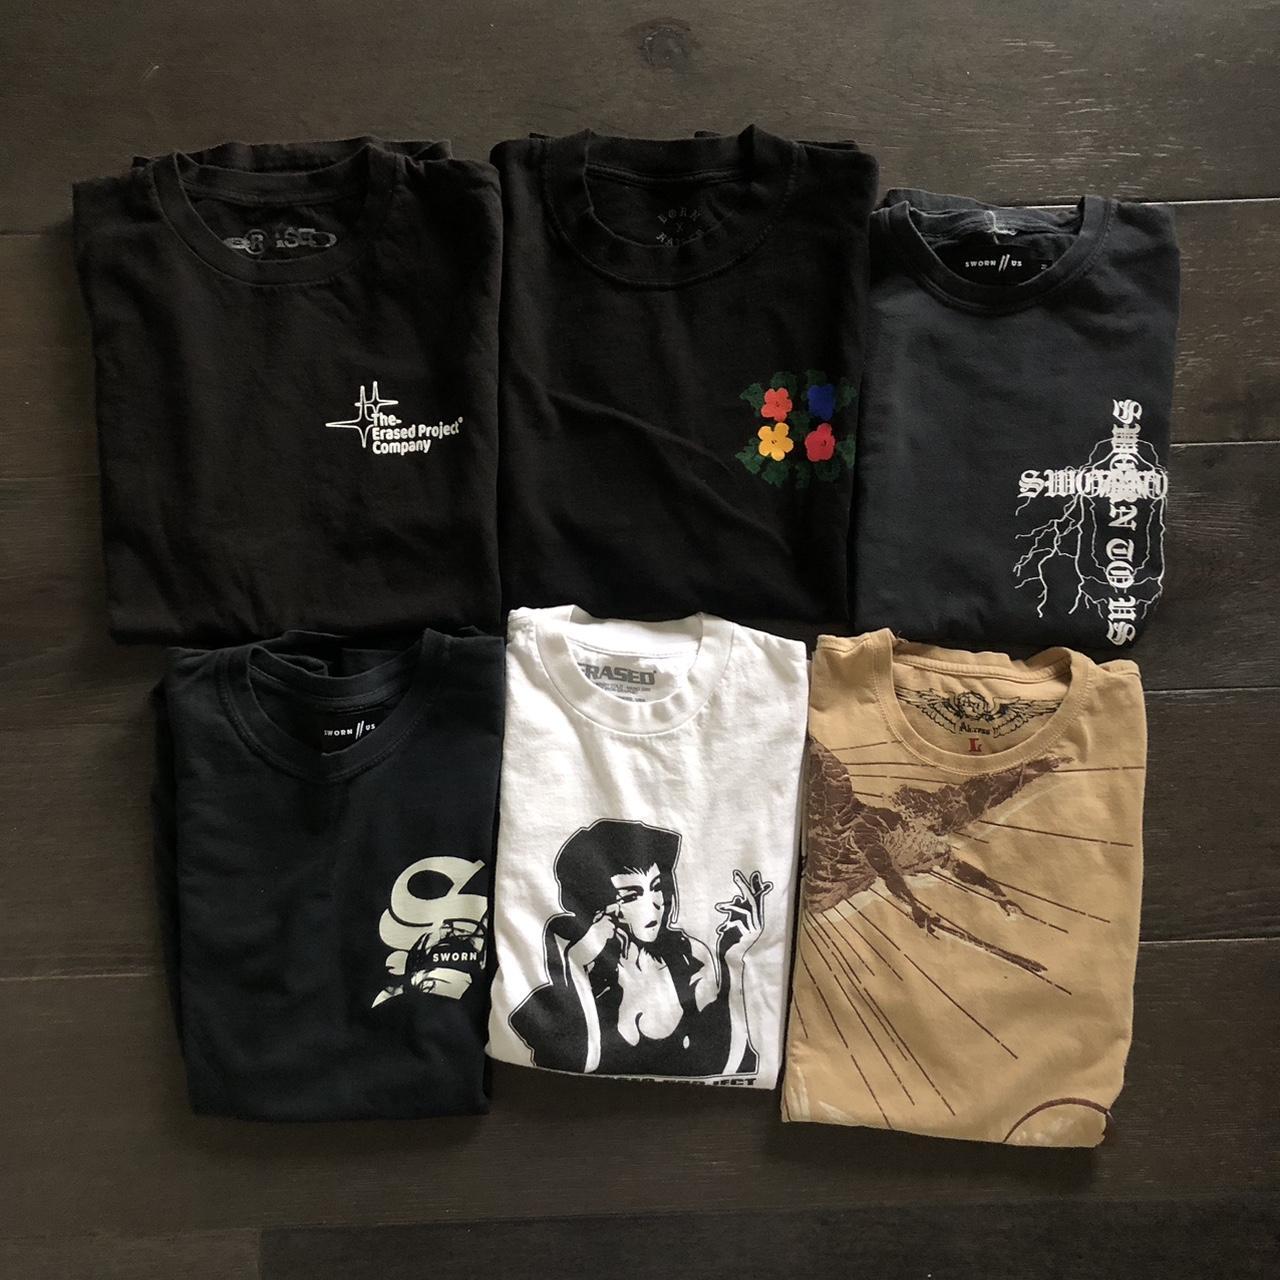 GRAPHIC TEES! 👾 6 tees for 60$ (must buy all 6) 👾... - Depop